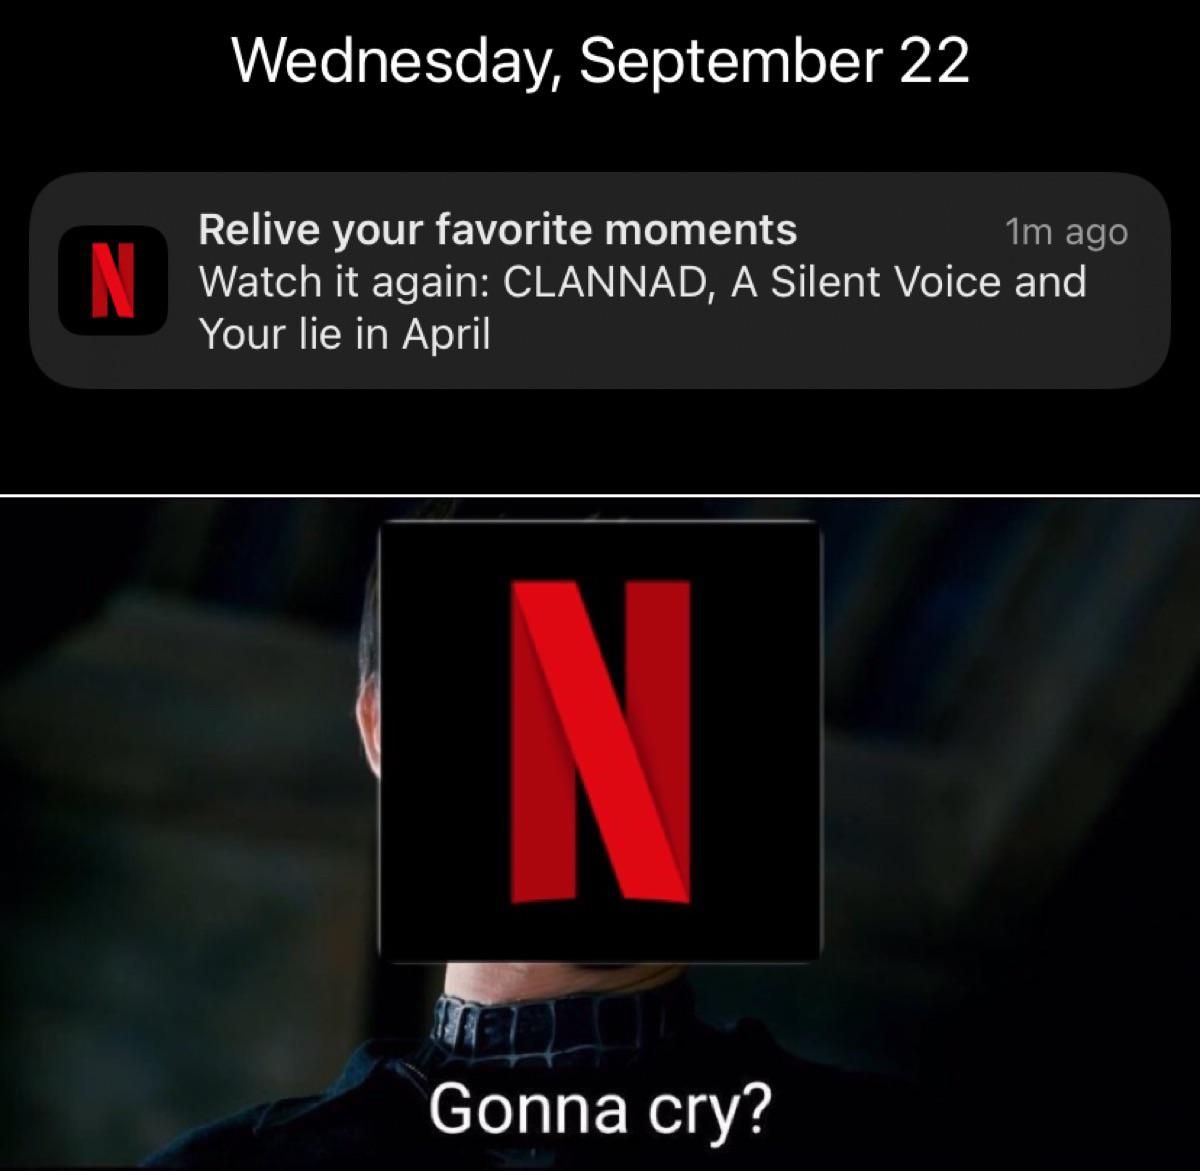 Yes Netflix, I’m going to cry.